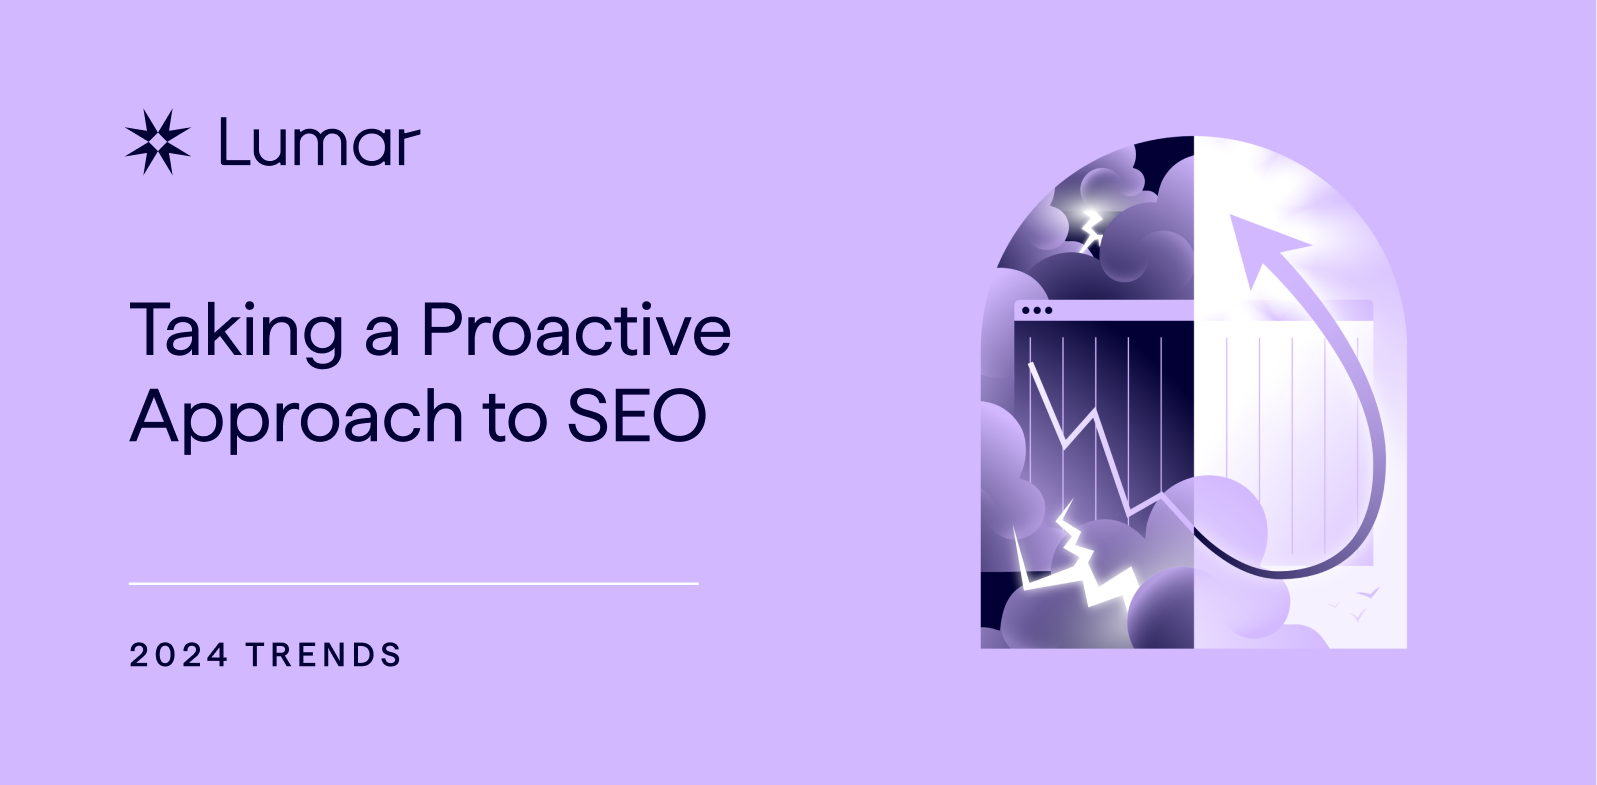 2024 SEO Trends: Taking a Proactive Approach to SEO